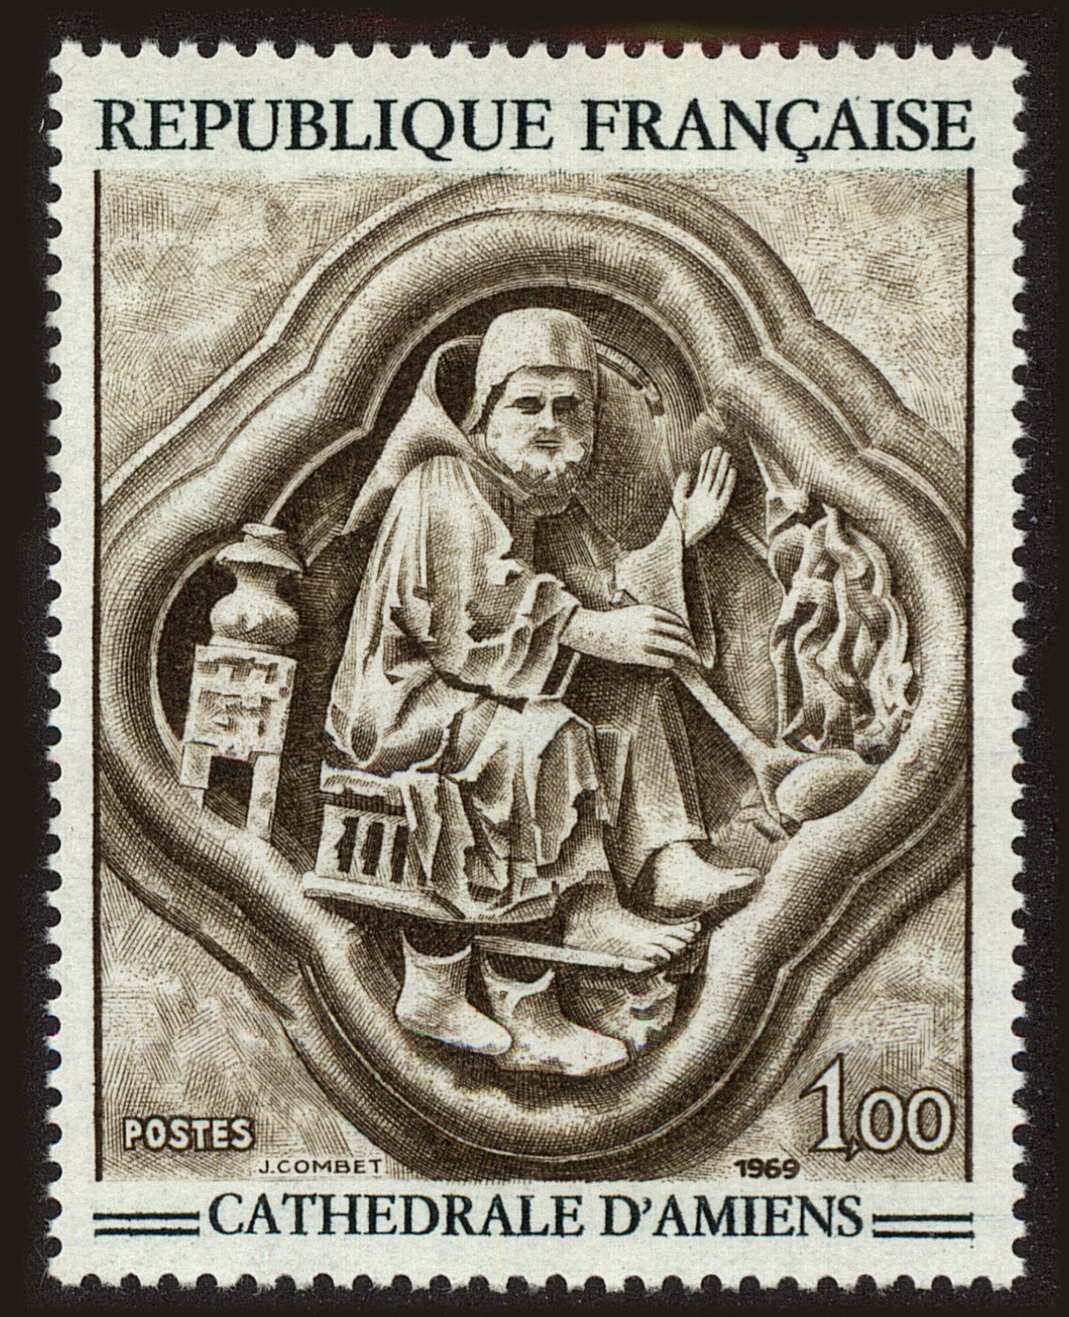 Front view of France 1236 collectors stamp